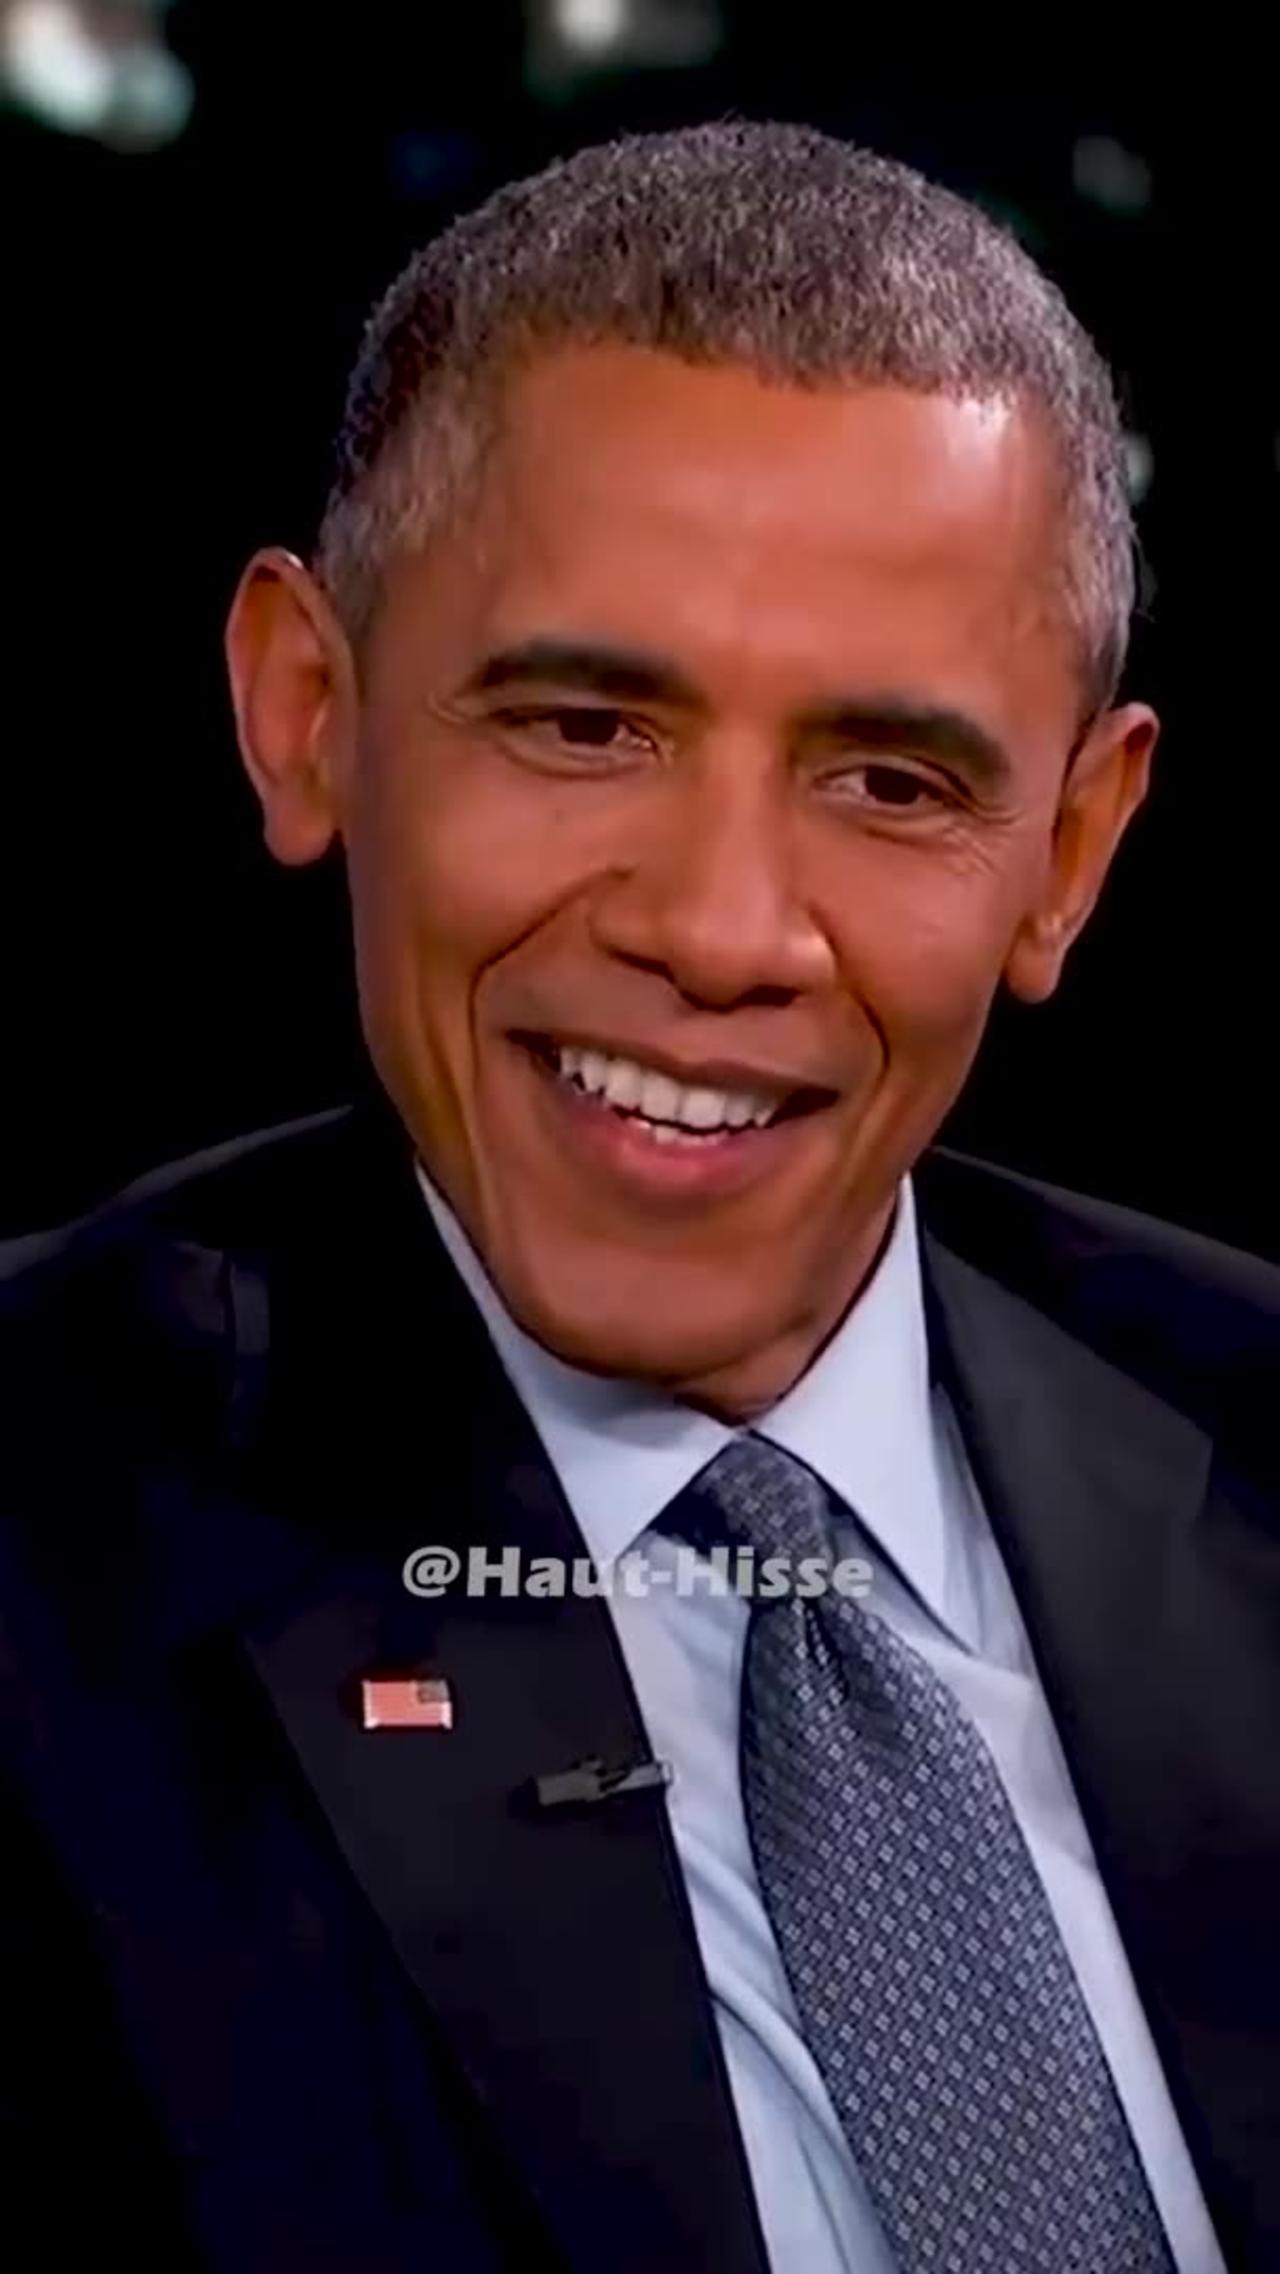 Jimmy Kimmel Show: Funny Moments with the Secret Service with Barack Obama